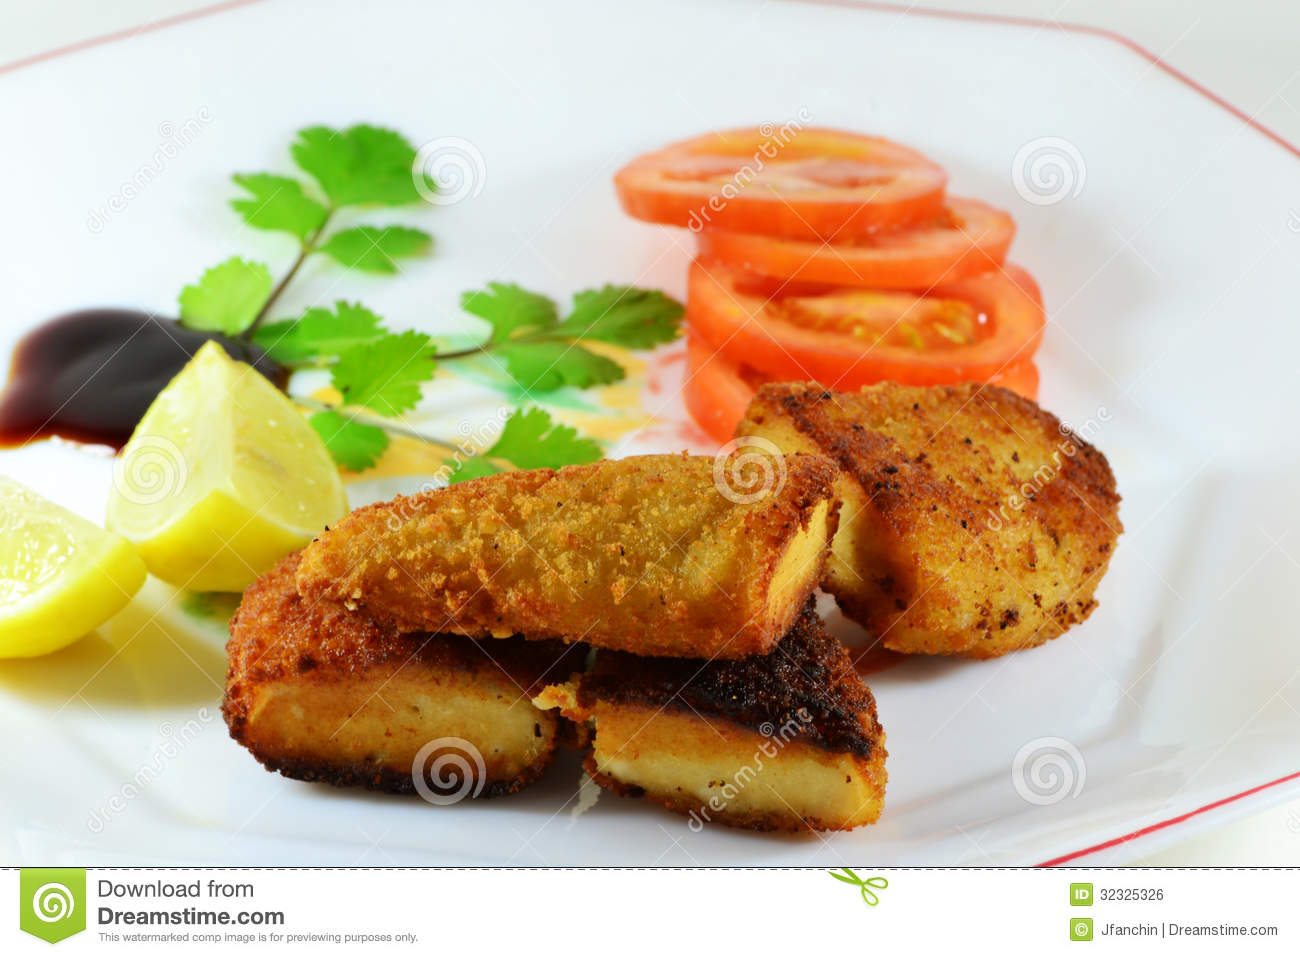 Chicken Fingers Royalty Free Stock Image   Image  32325326